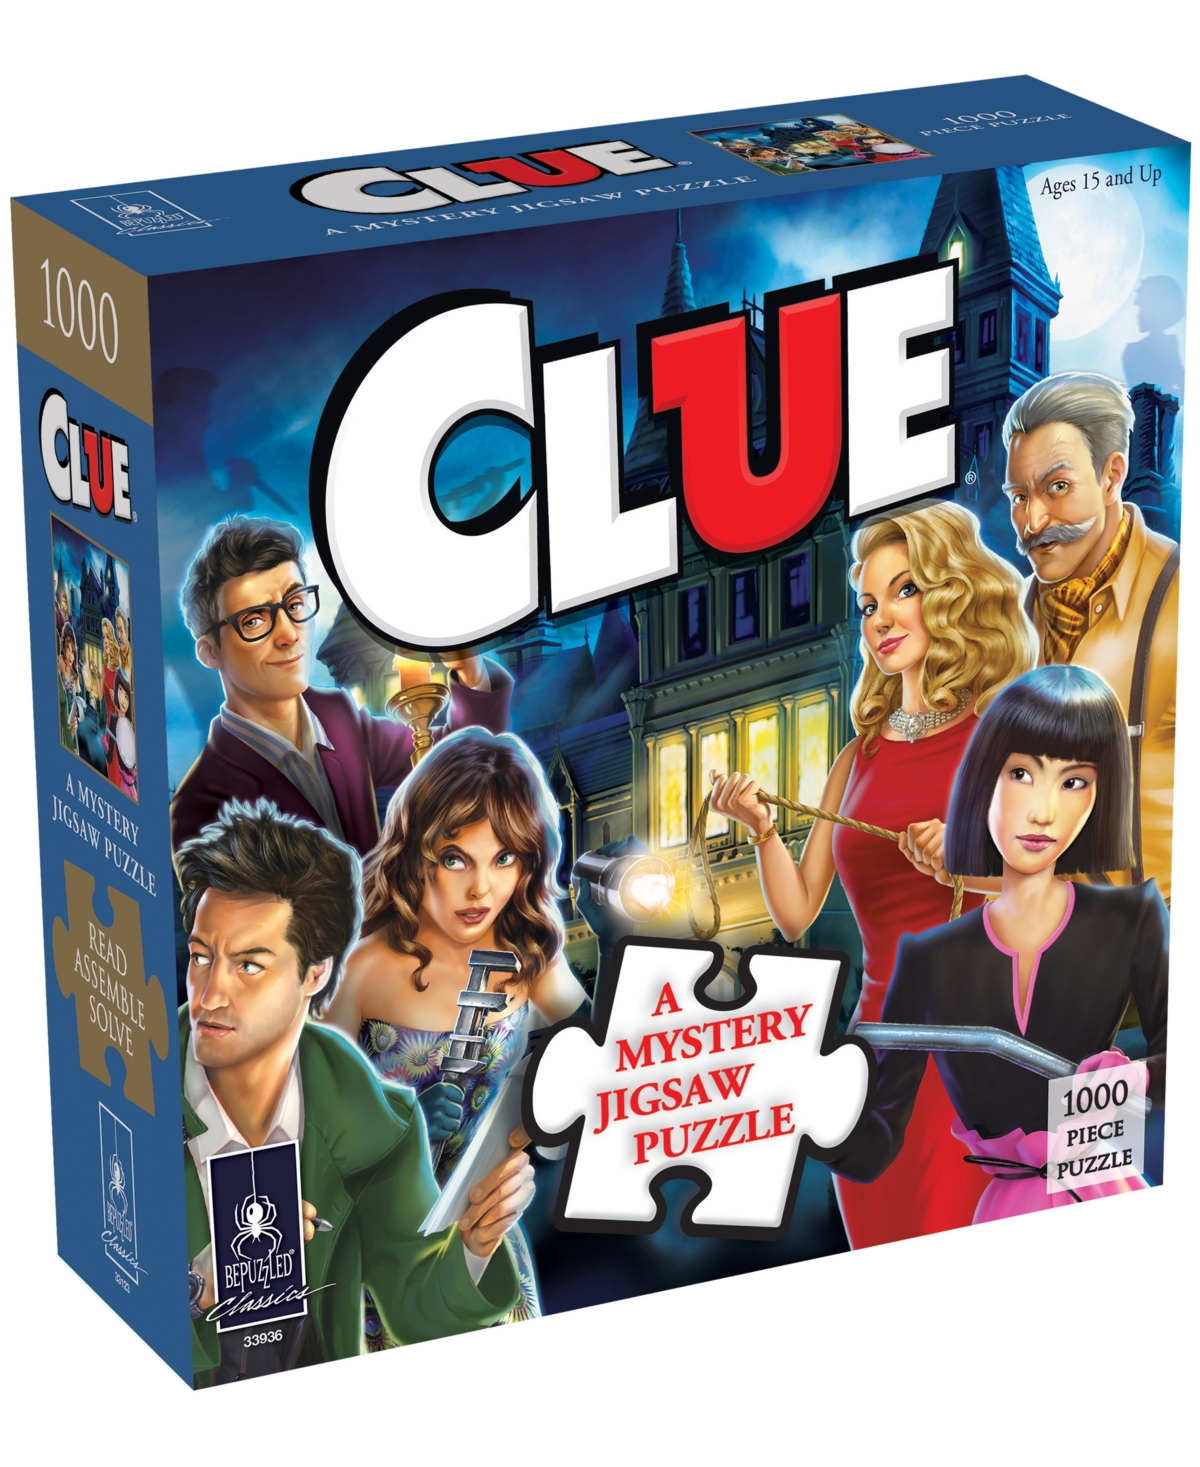 Bepuzzled Clue A Mystery Jigsaw Puzzle Set, 1000 Pieces In Multi Color